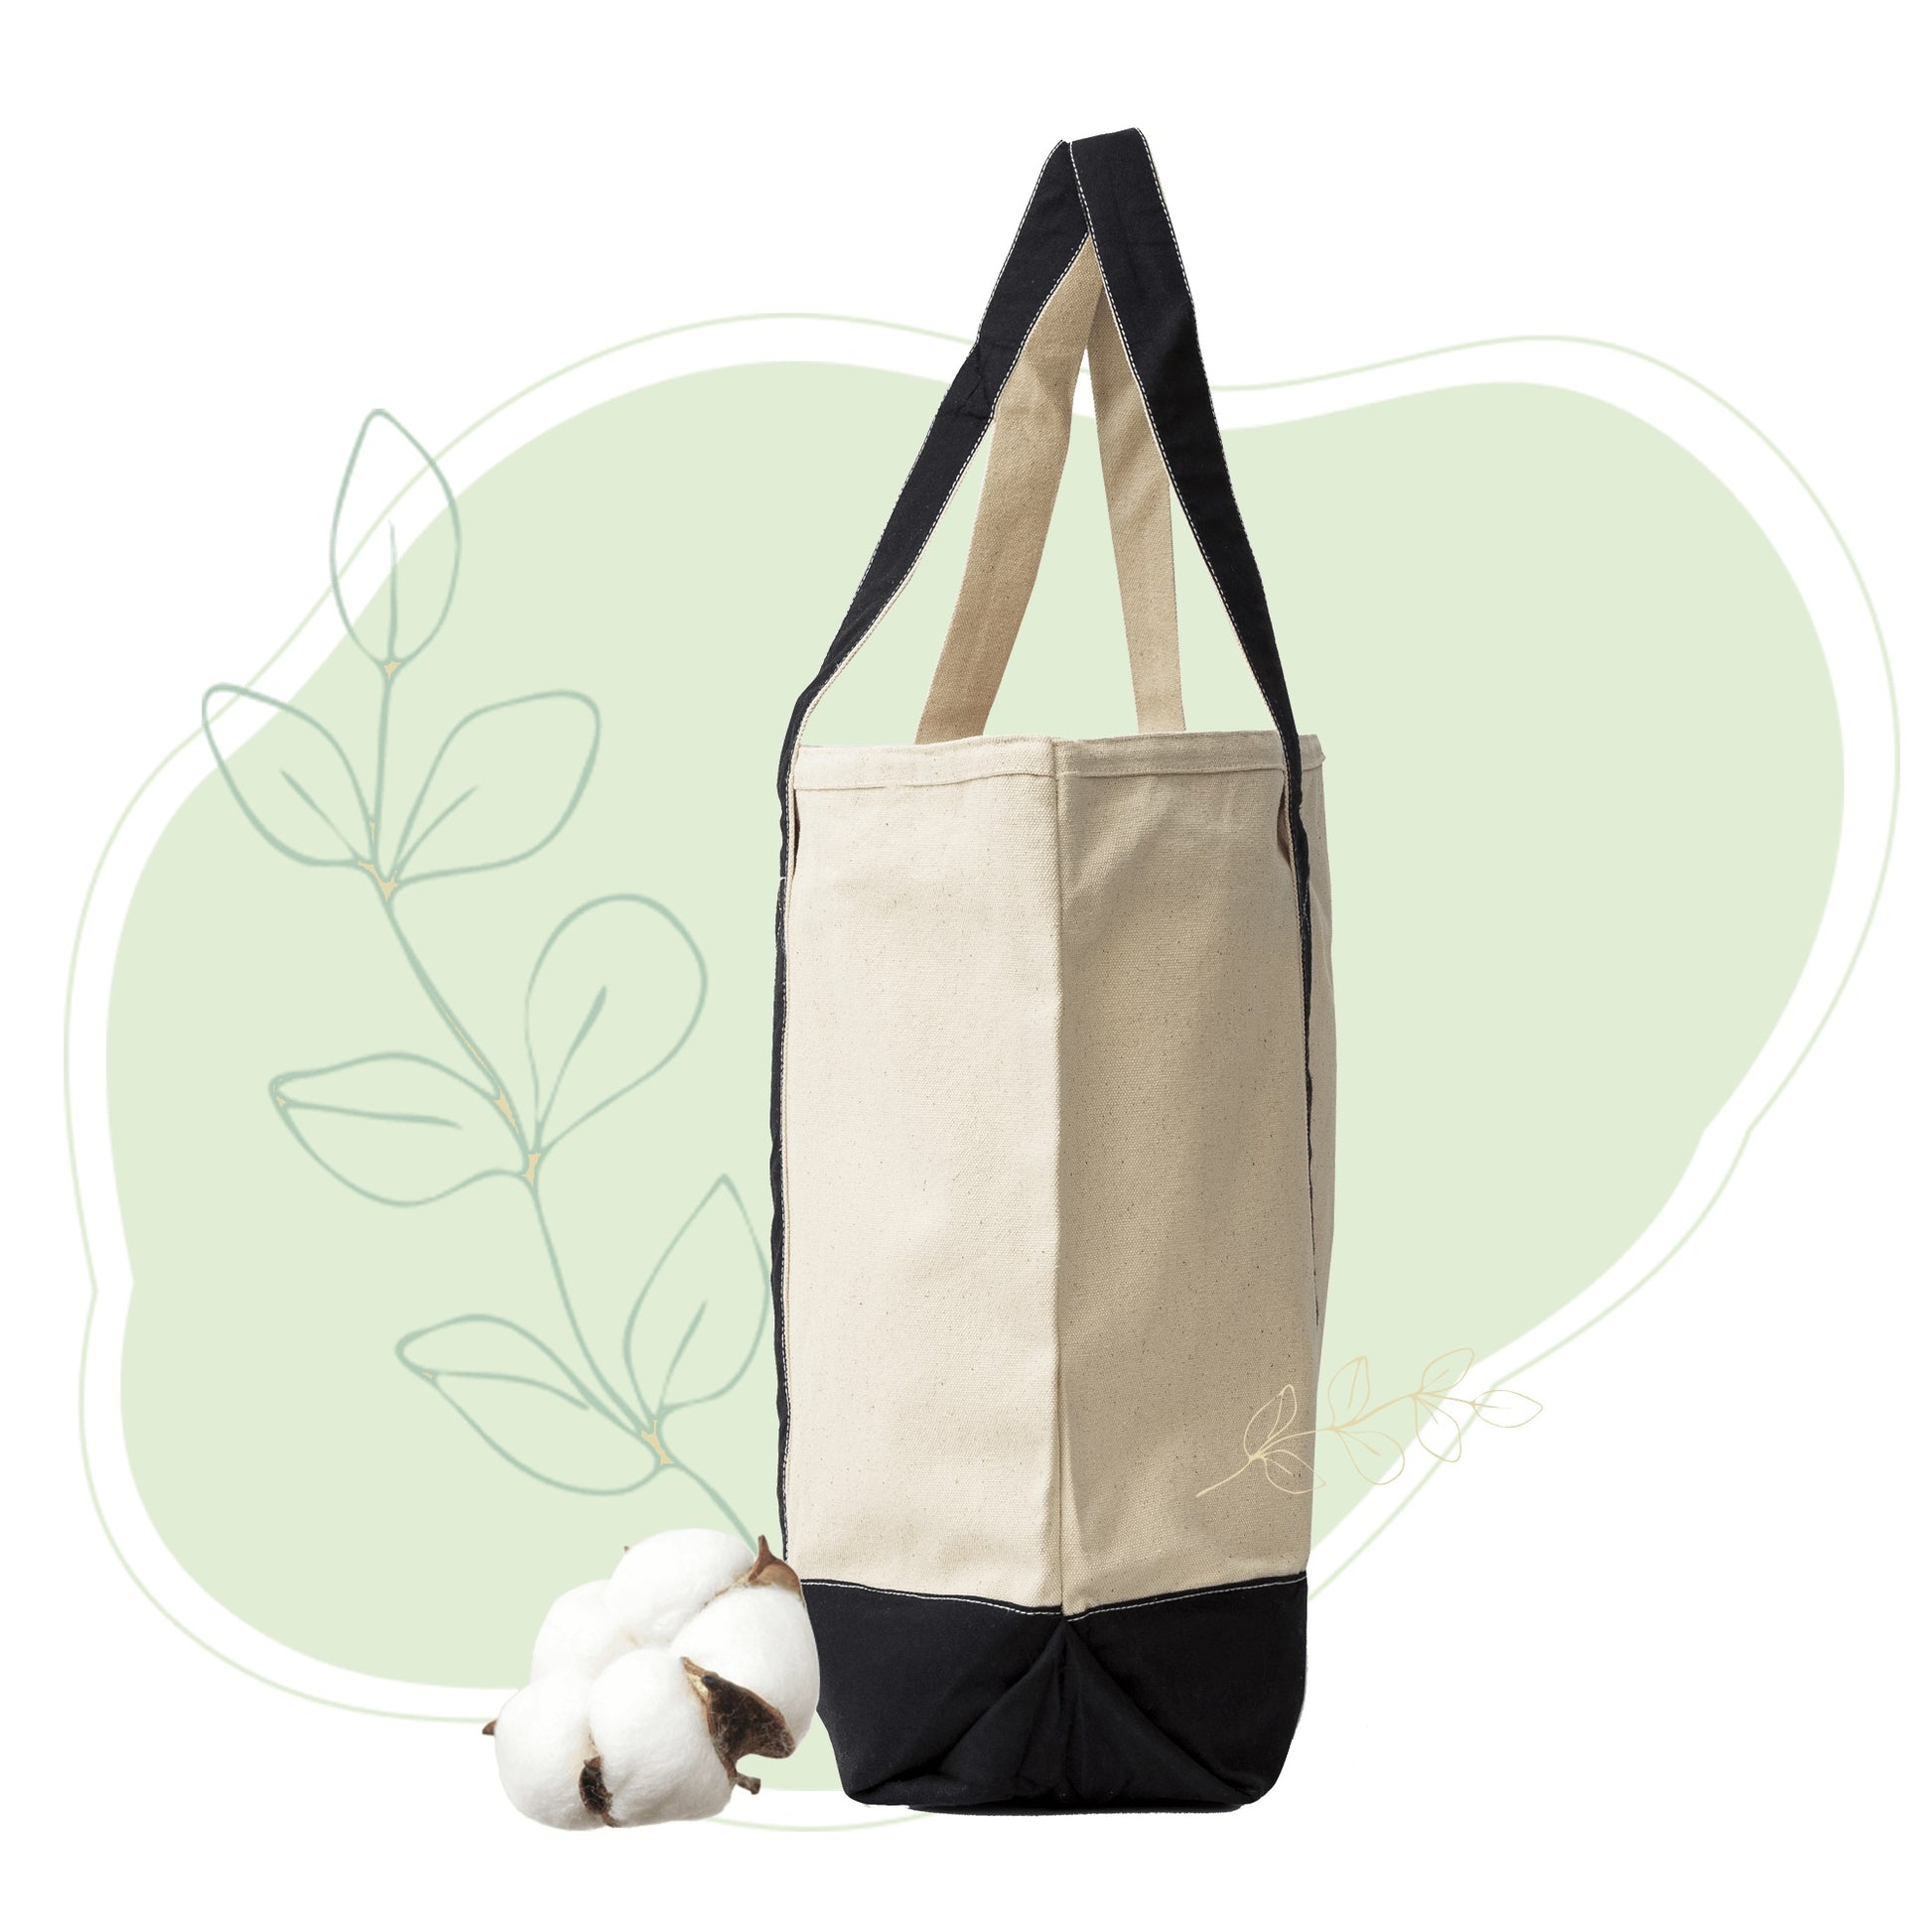 Extra Large Tote Bag Canvas Shopping Tote With Inner Zipper 